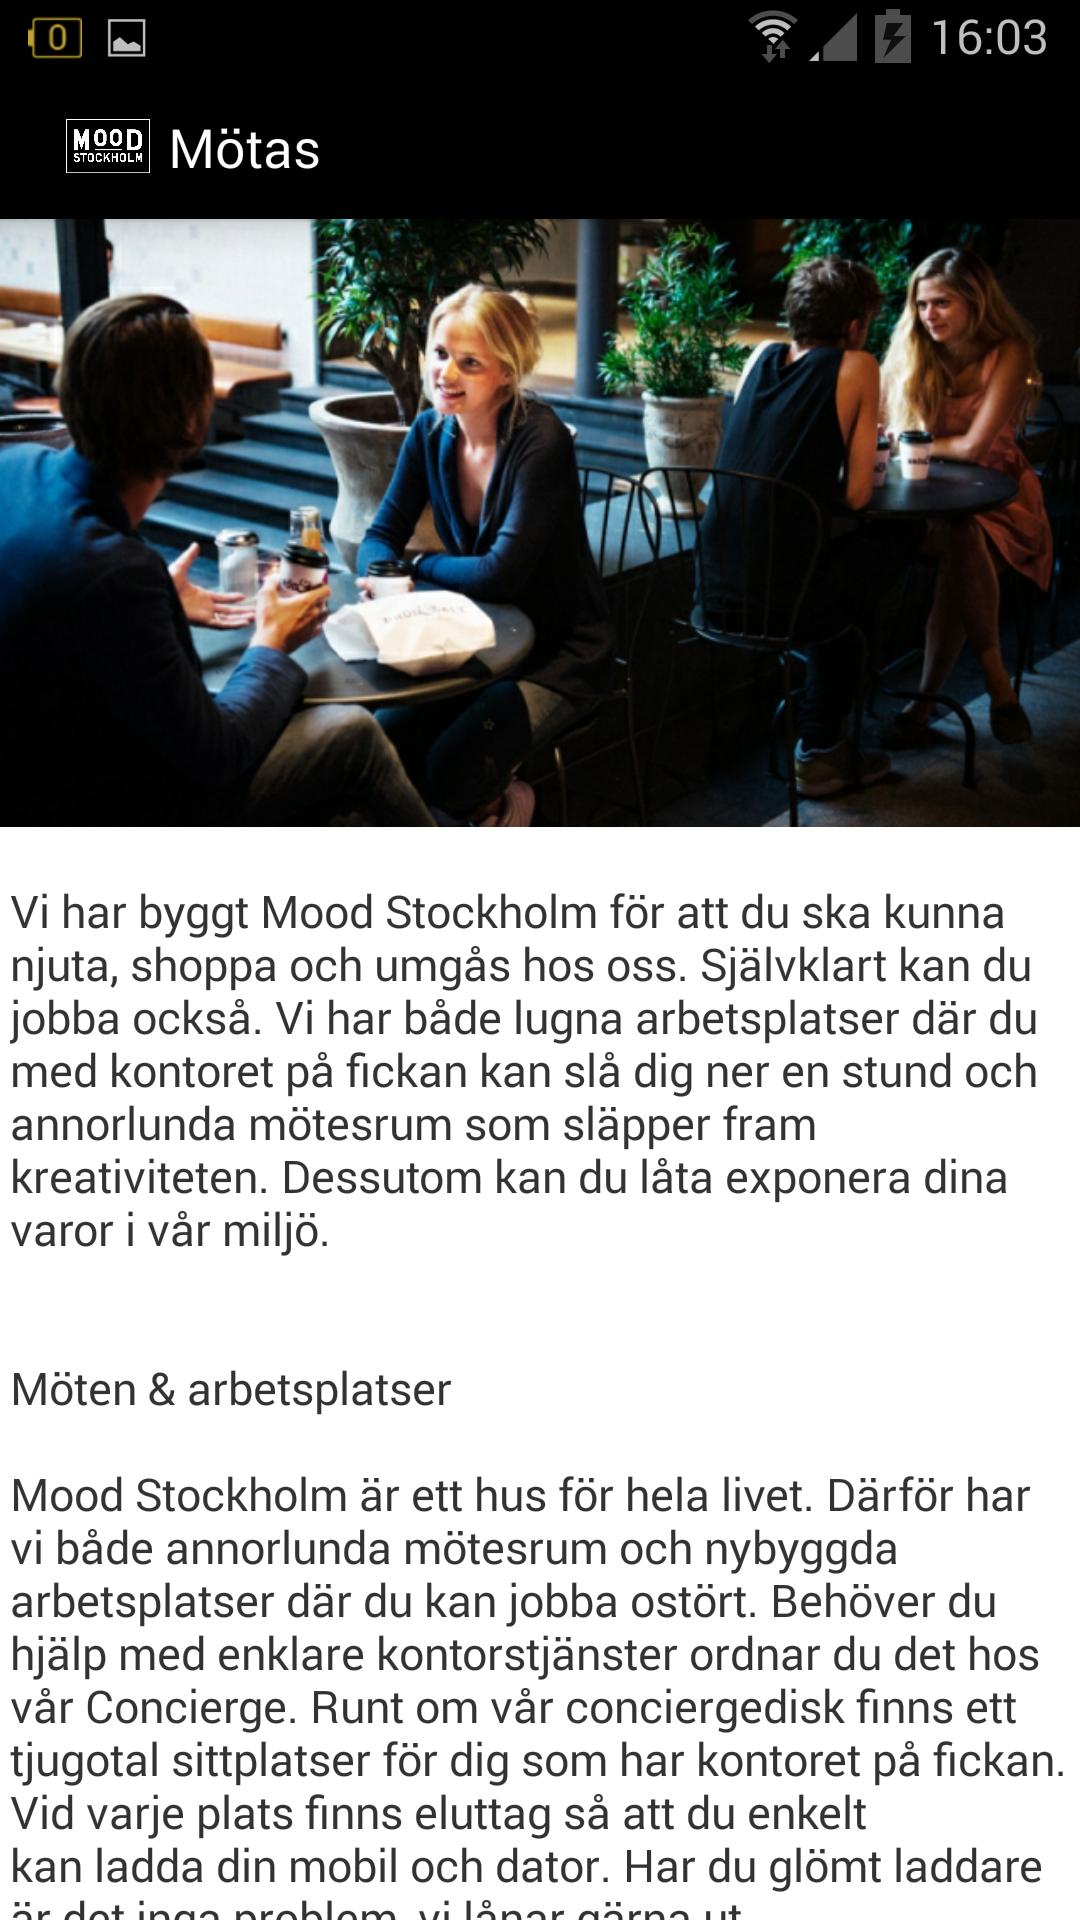 Mood Stockholm for Android - APK Download